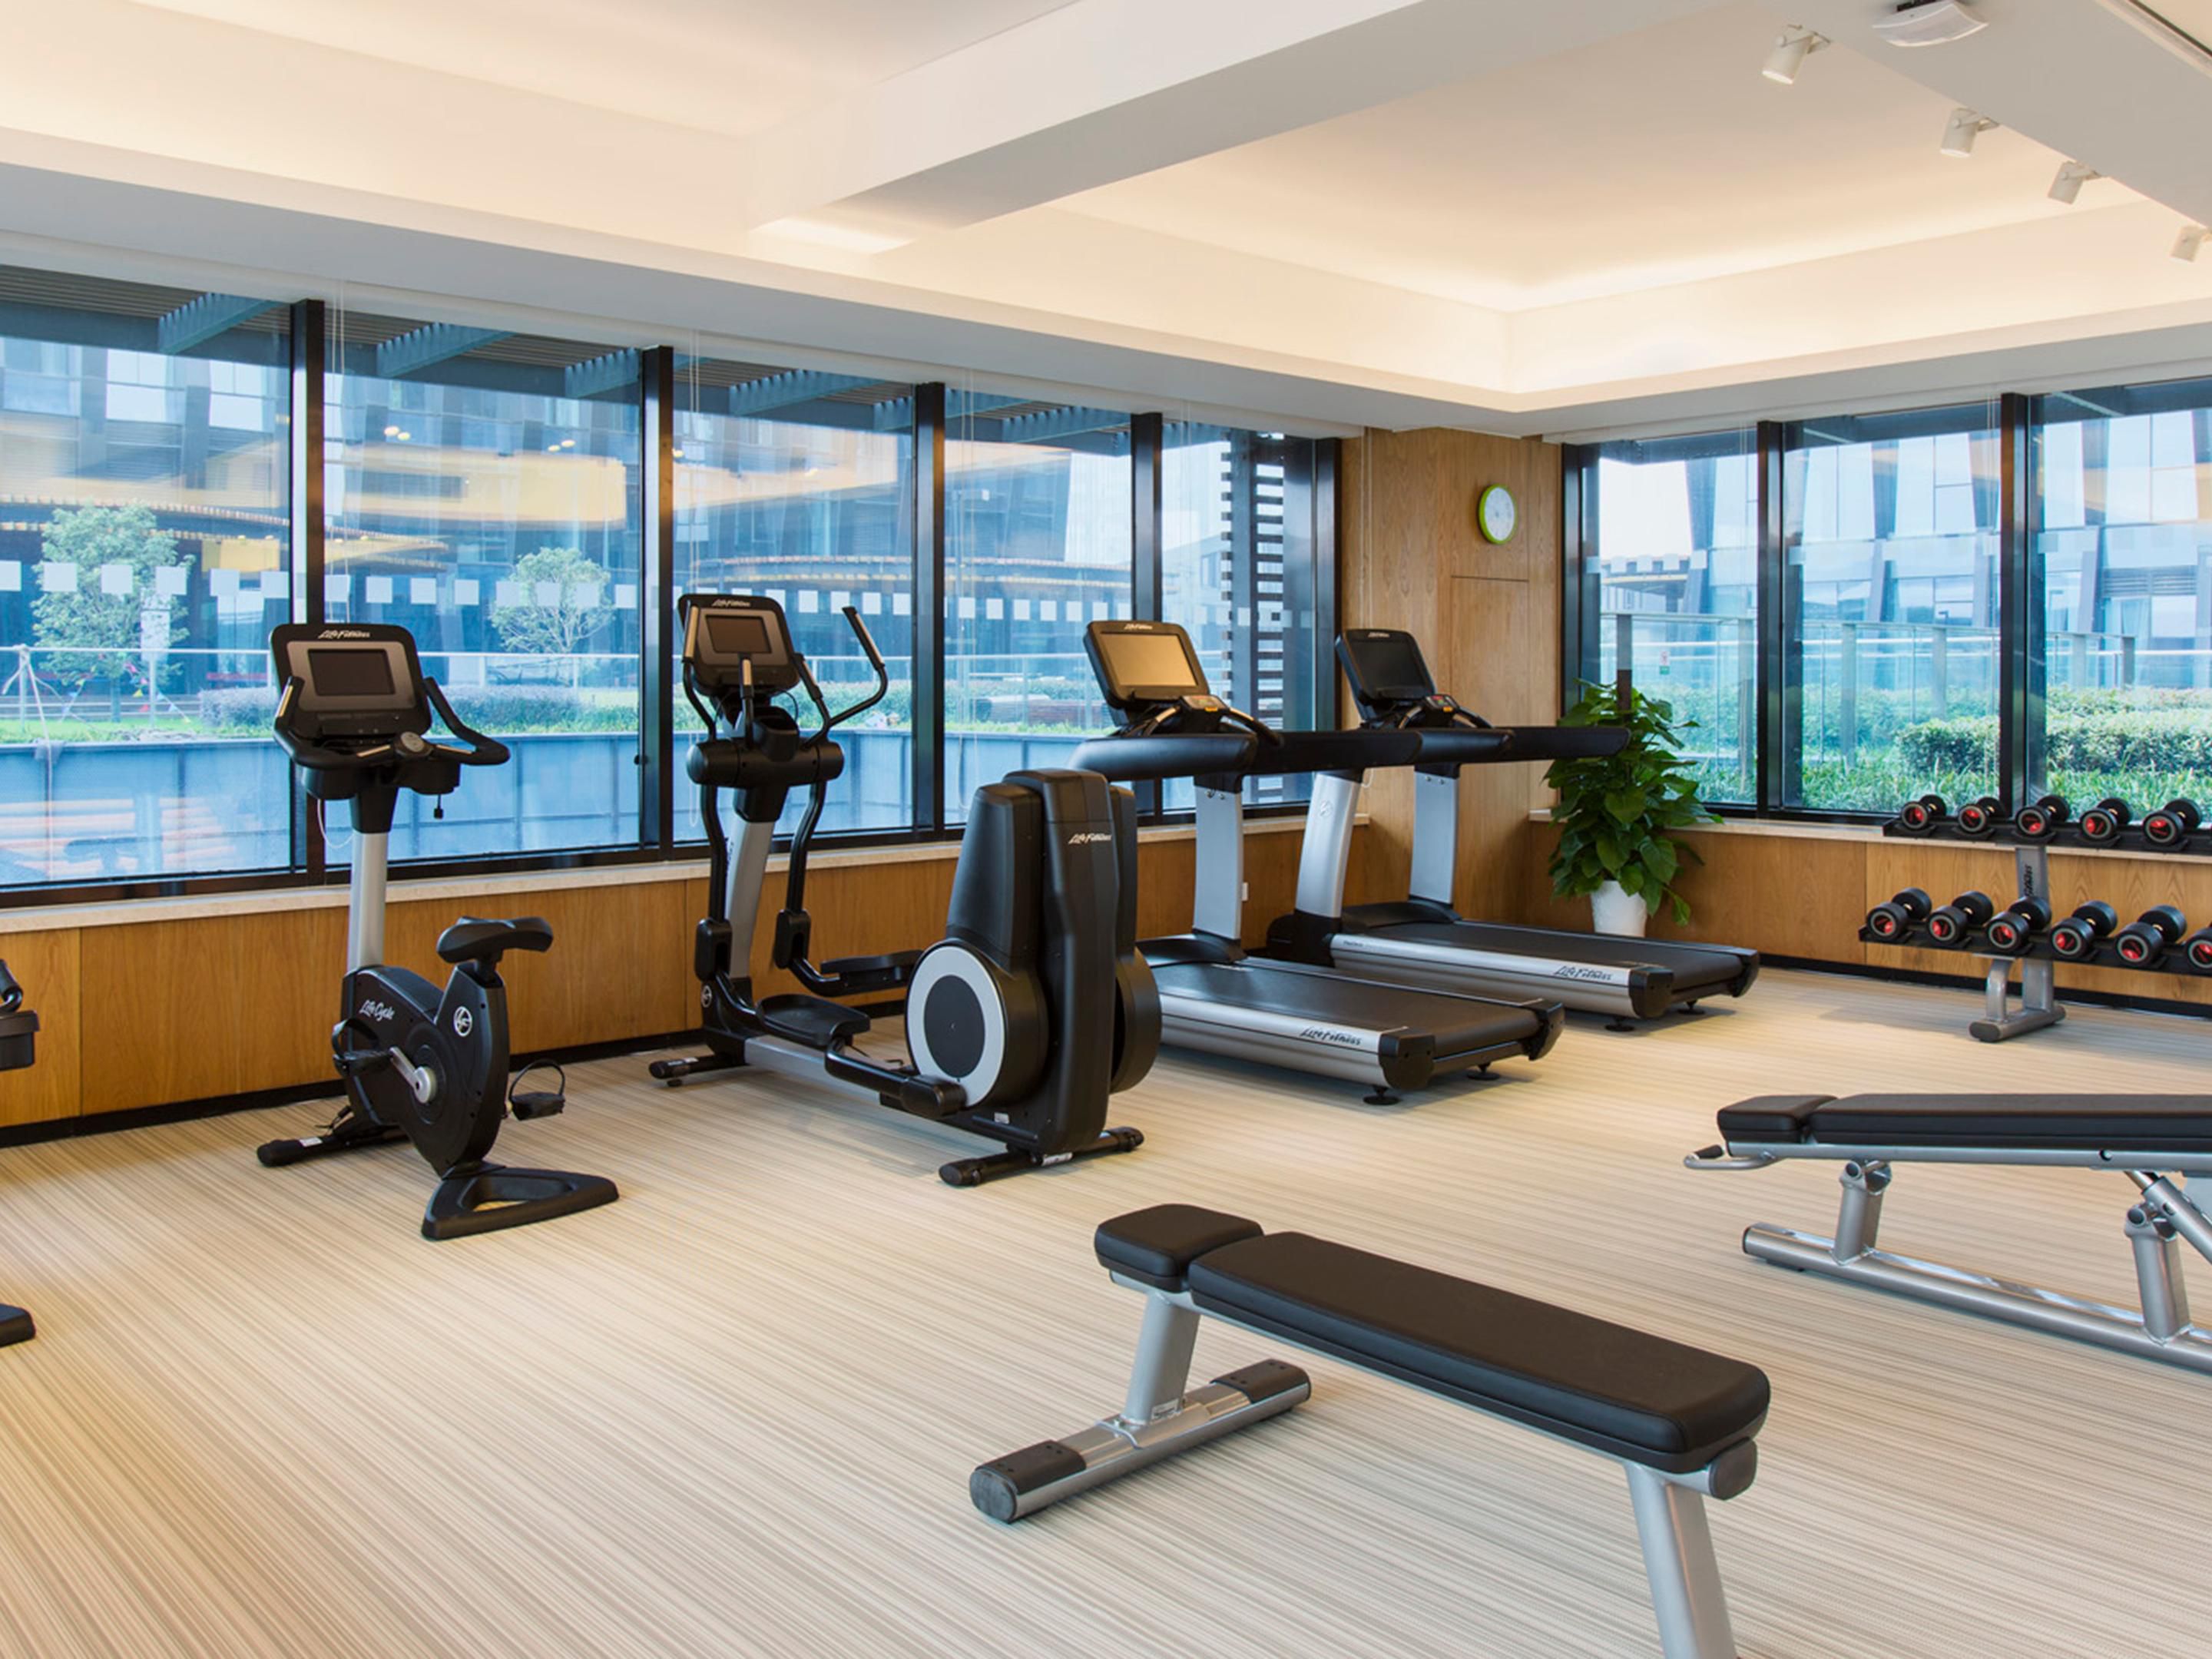 The gym is located at the 6th Floor, equipped with high-end fitness equipment and floor-to-ceiling windows, provide a comfortable and relaxing workout environment.